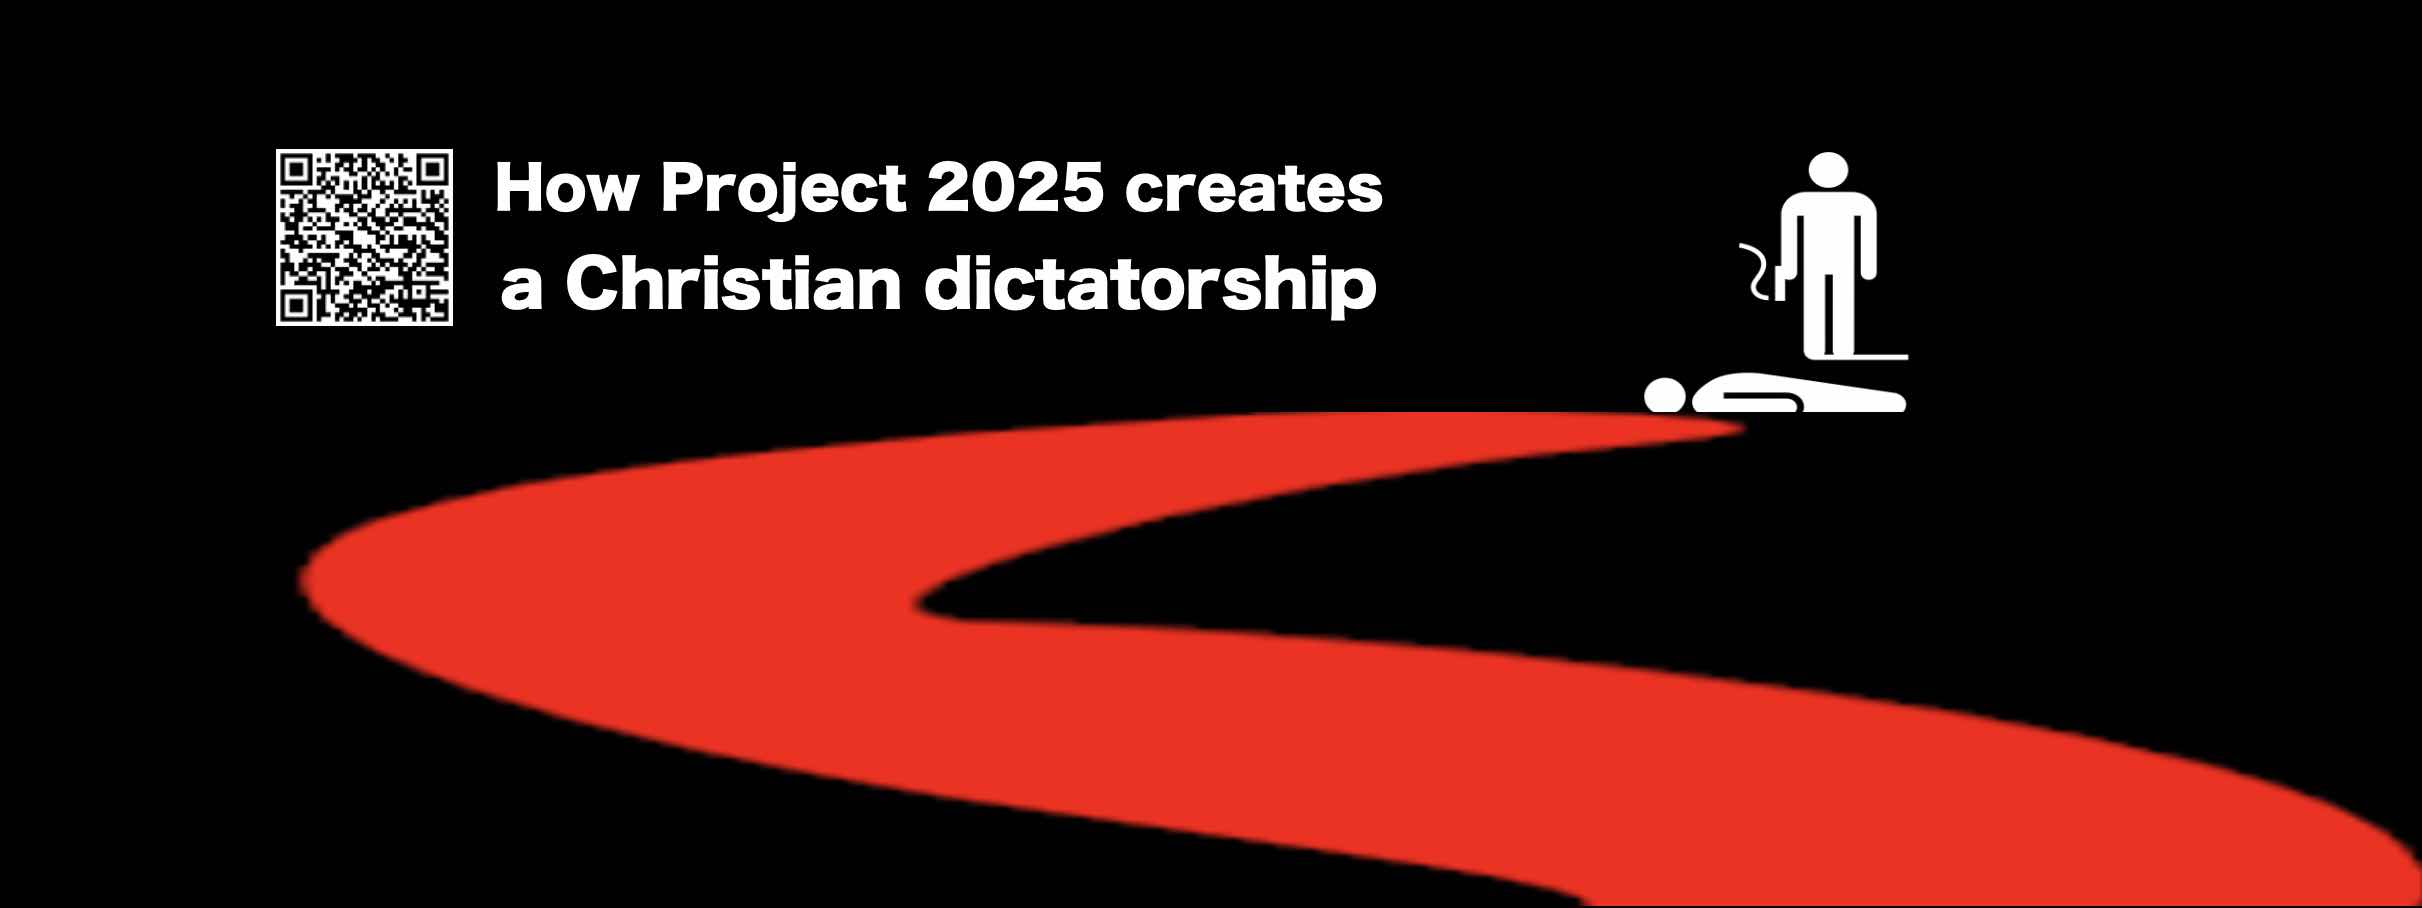 Project 2025 overturns American democracy to create a Christian Dictatorship